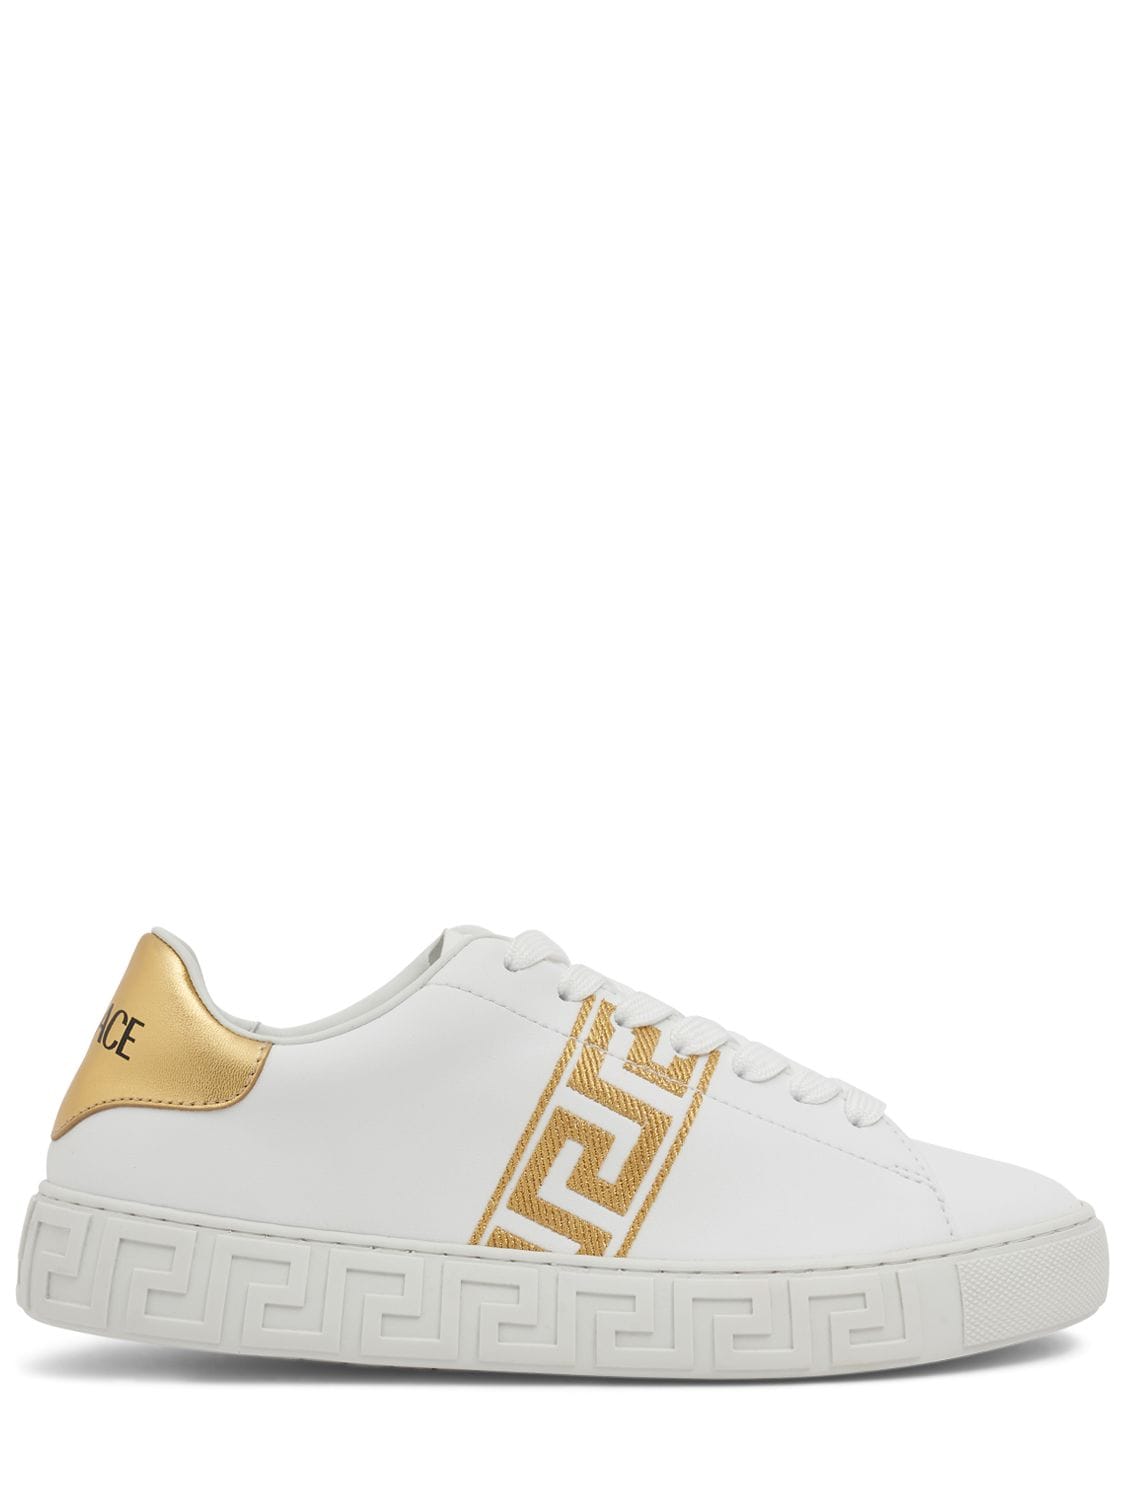 Versace Faux Leather Sneakers W/ Embroidery In White,gold